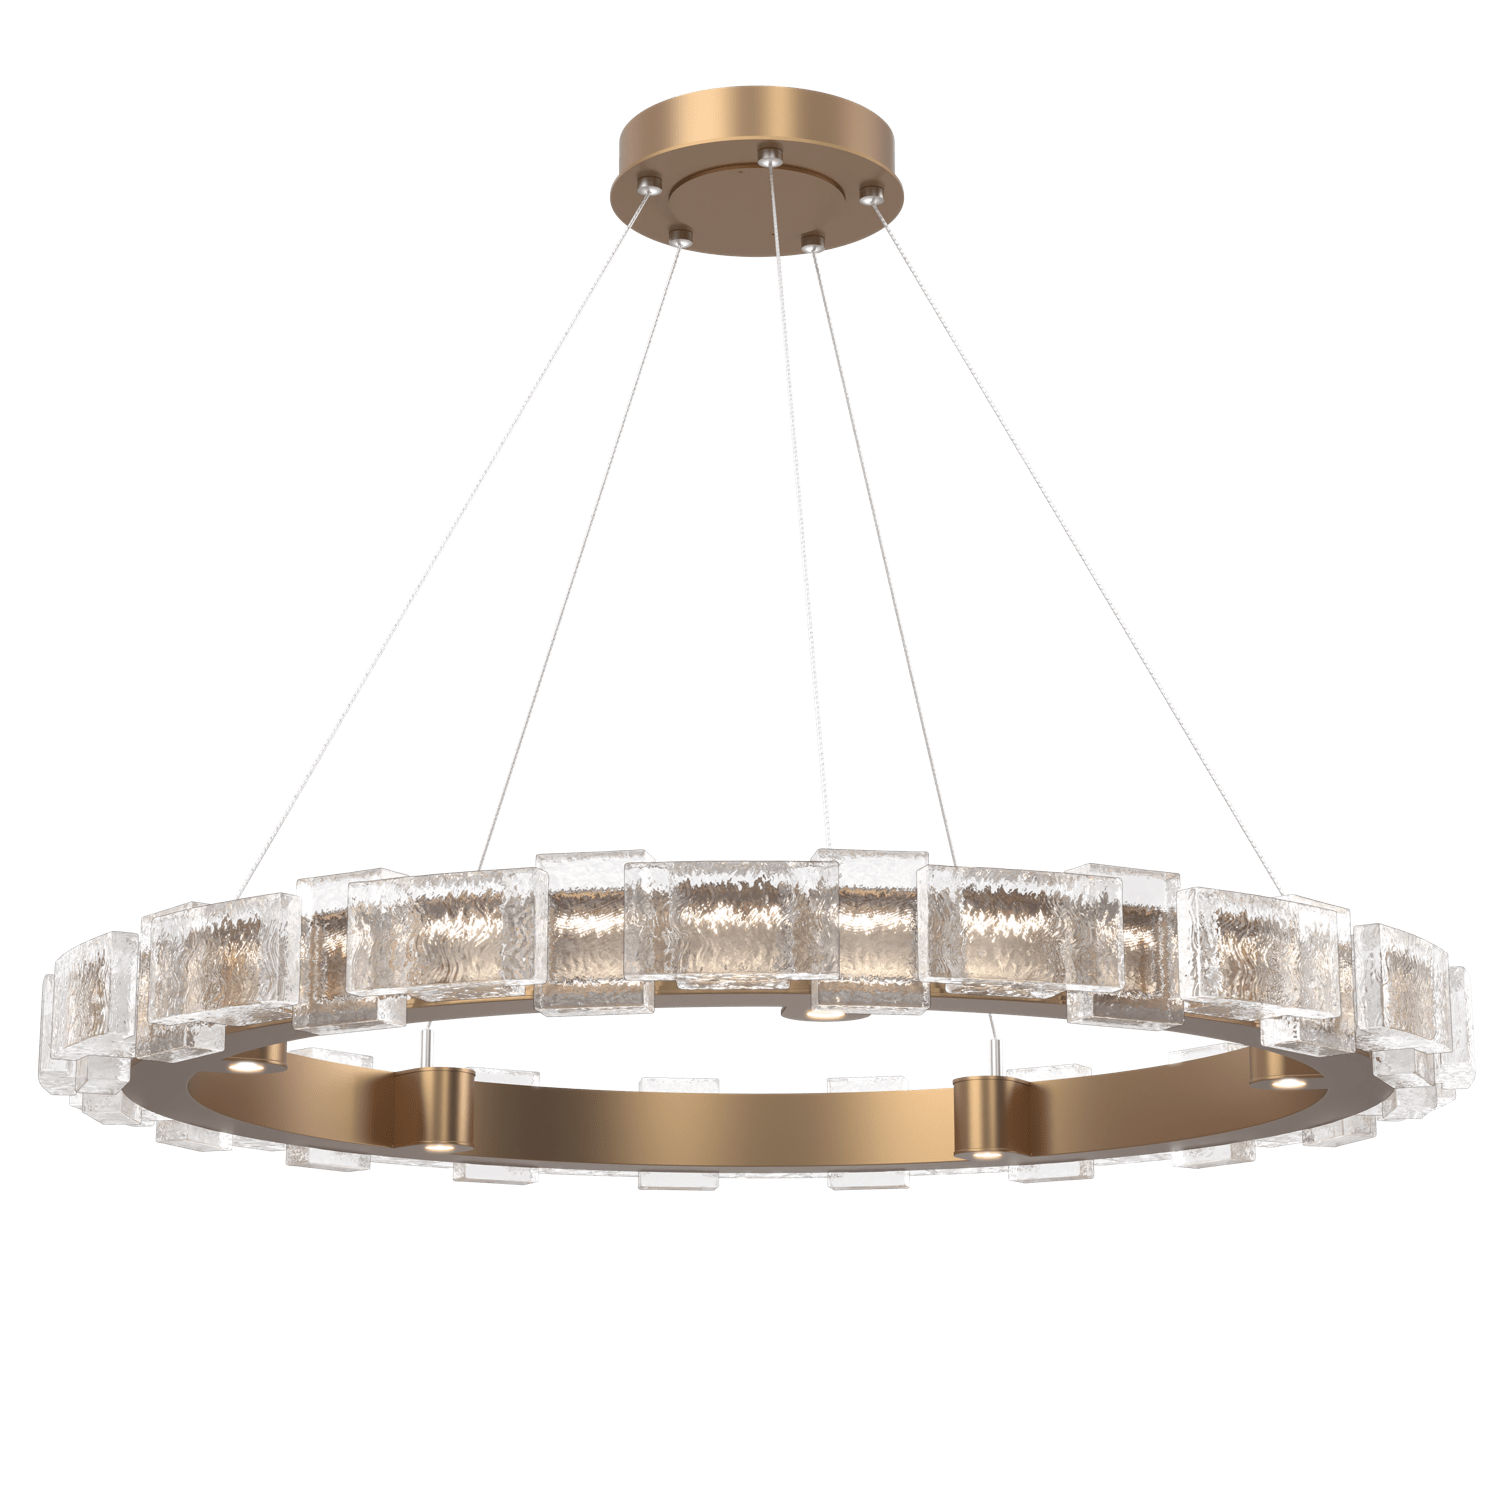 CHB0087-38-NB-TE-Hammerton-Studio-Tessera-38-inch-ring-chandelier-with-novel-brass-finish-and-clear-tetro-cast-glass-shade-and-LED-lamping